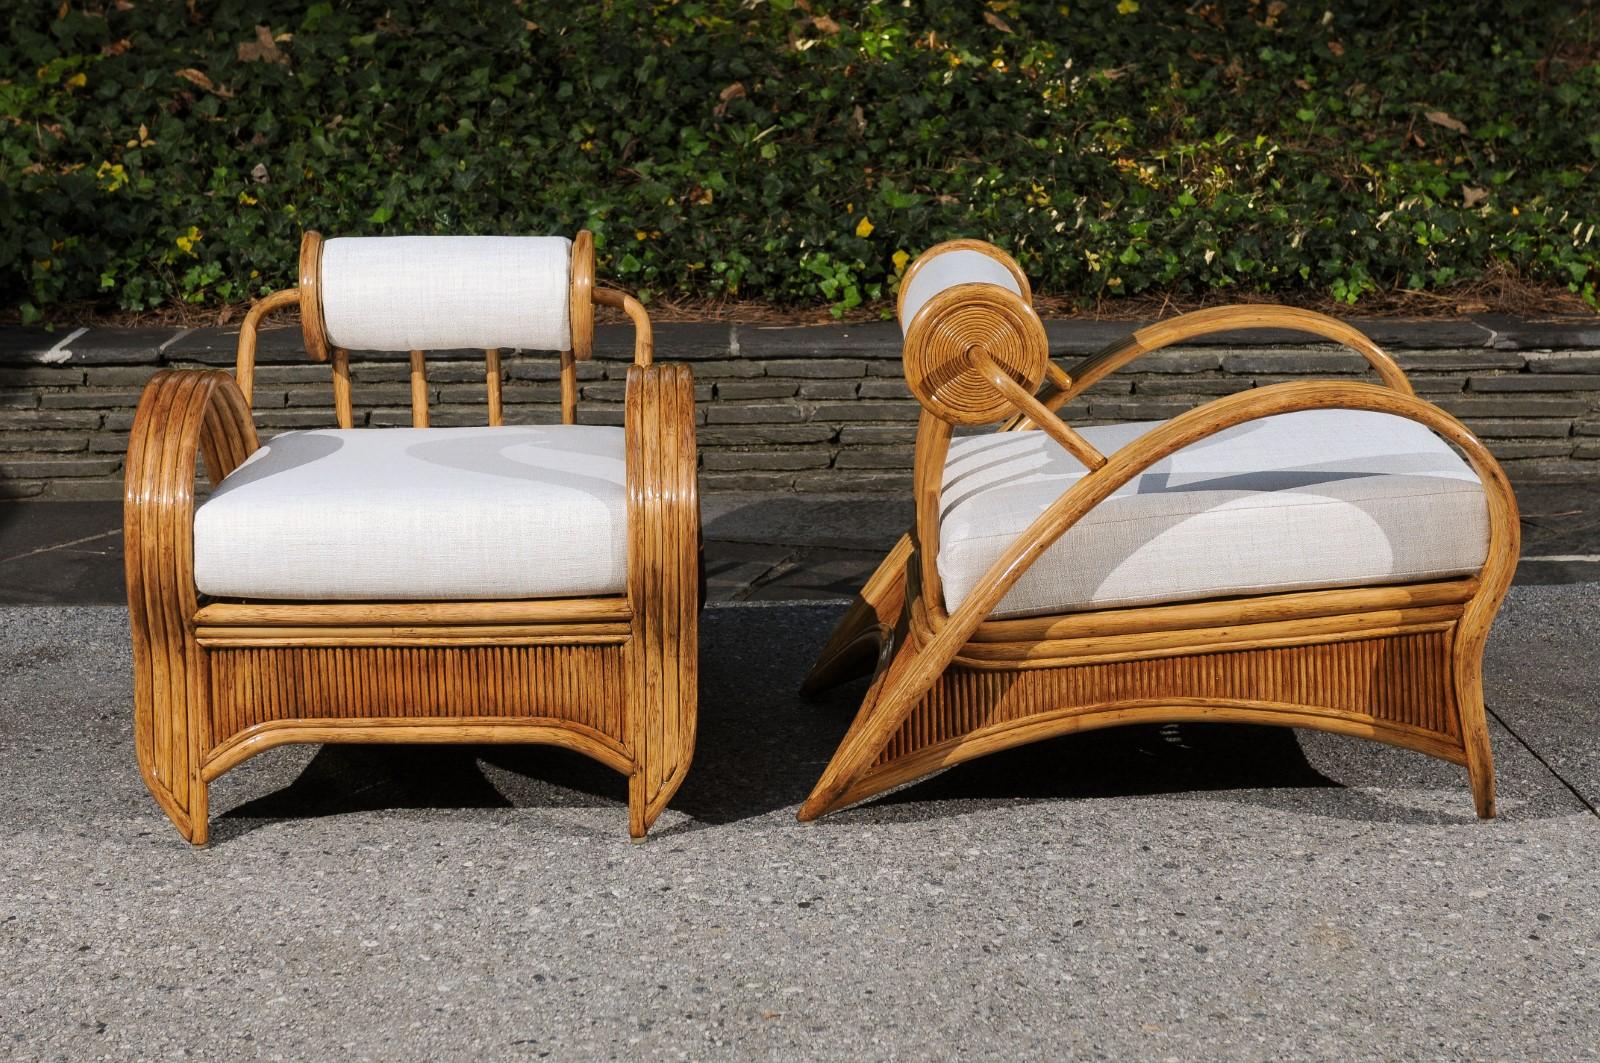 Organic Modern Extraordinary Pair of Art Deco Style Loungers by Betty Cobonpue, circa 1980 For Sale